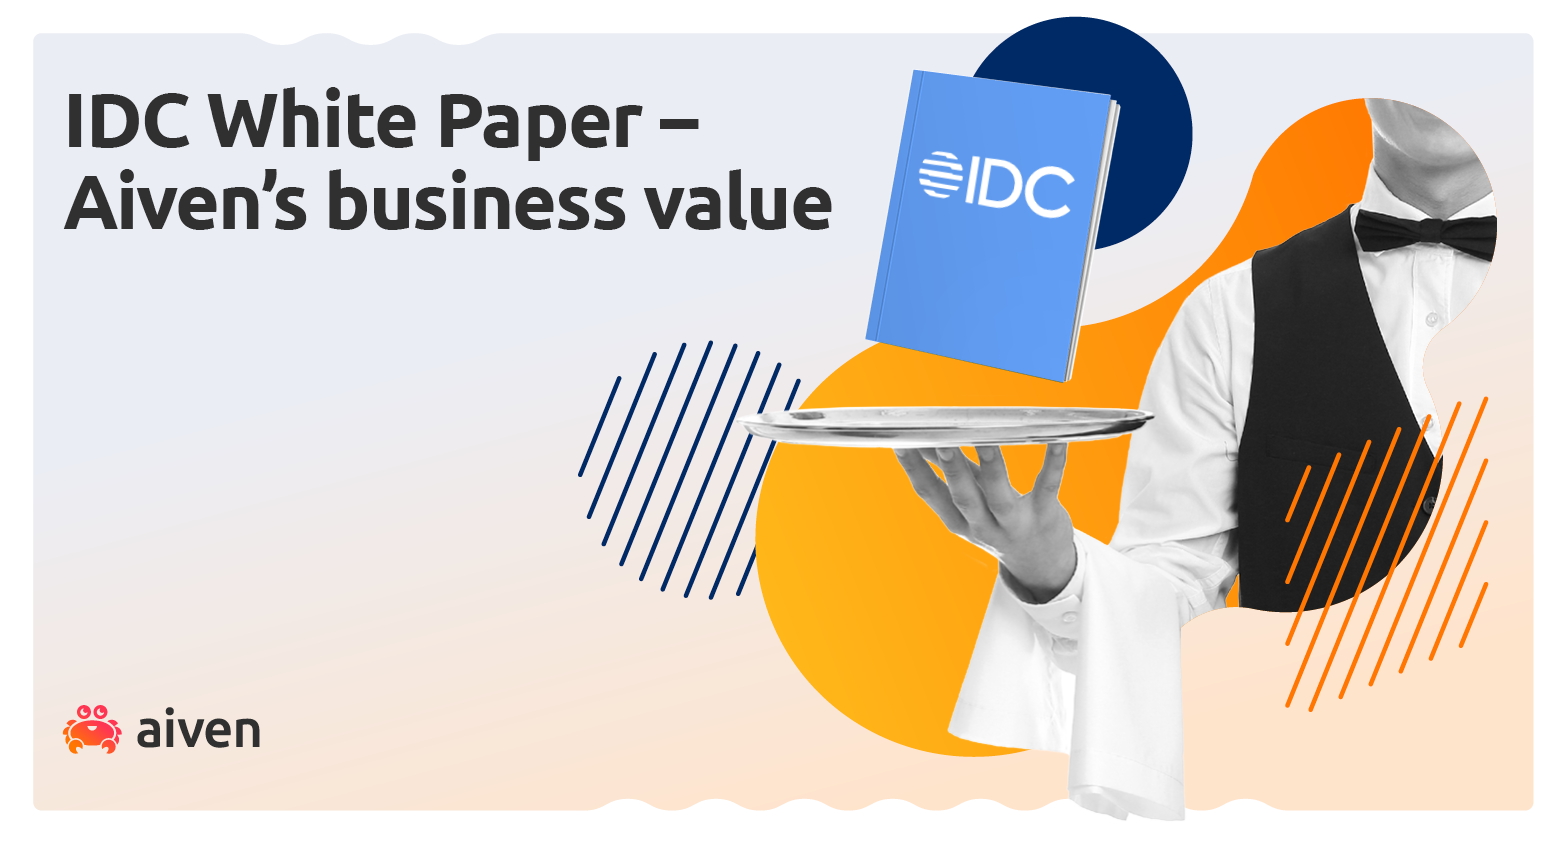 IDC White paper: Aiven's cloud data services bring 340% three year ROI illustration